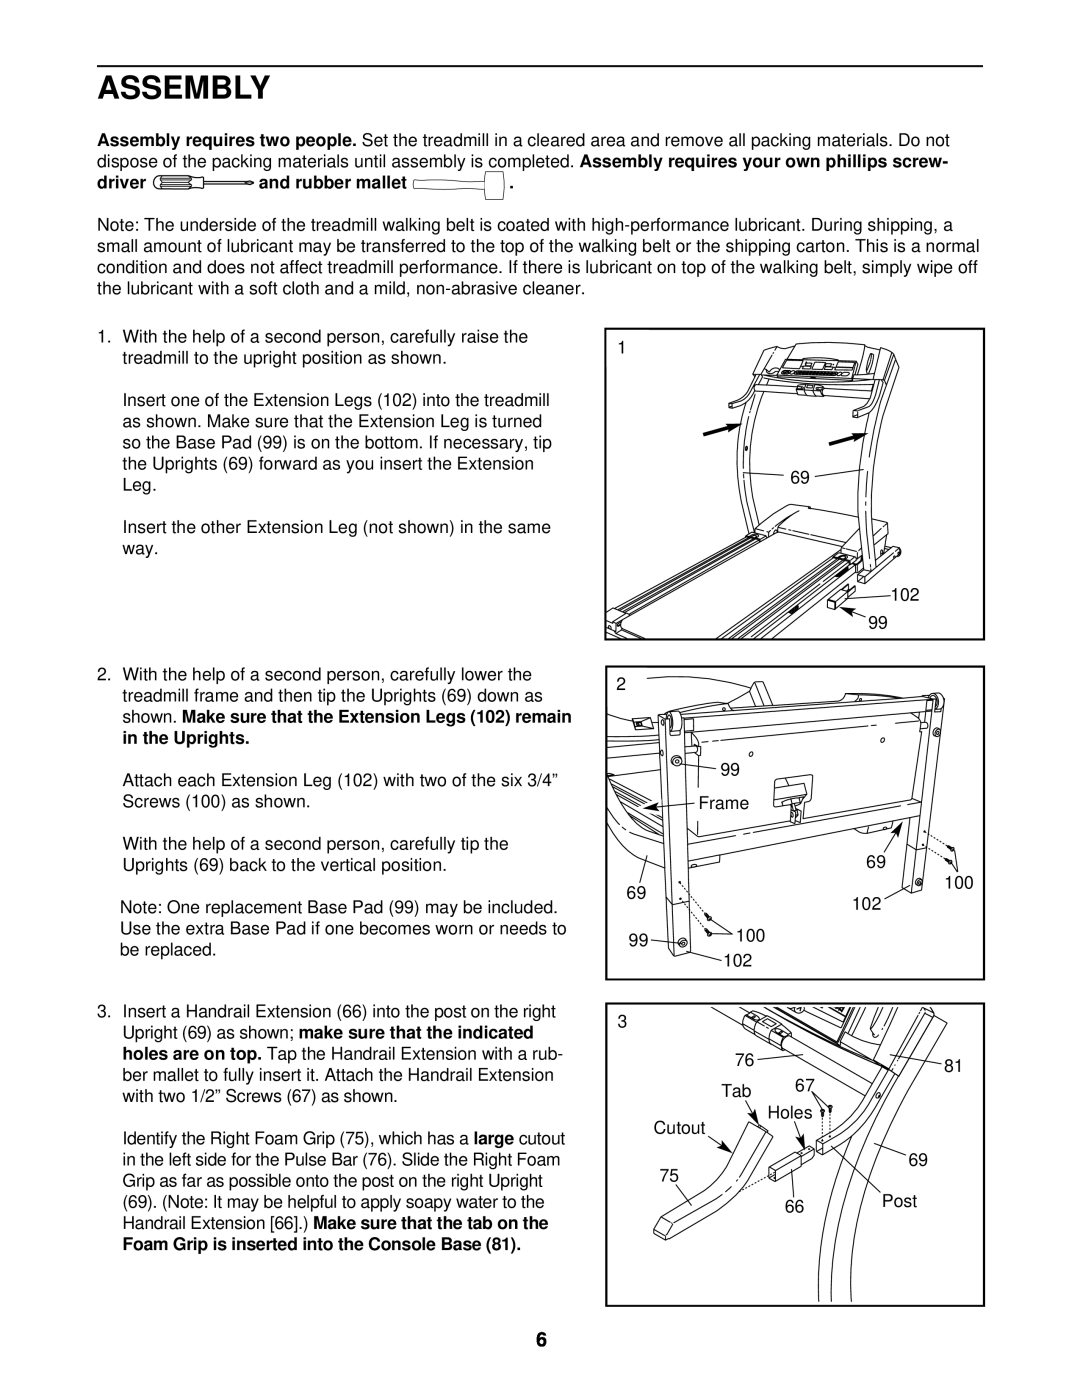 ProForm DRTL99720 user manual Assembly requires your own phillips screw, driver, rubber mallet, large 